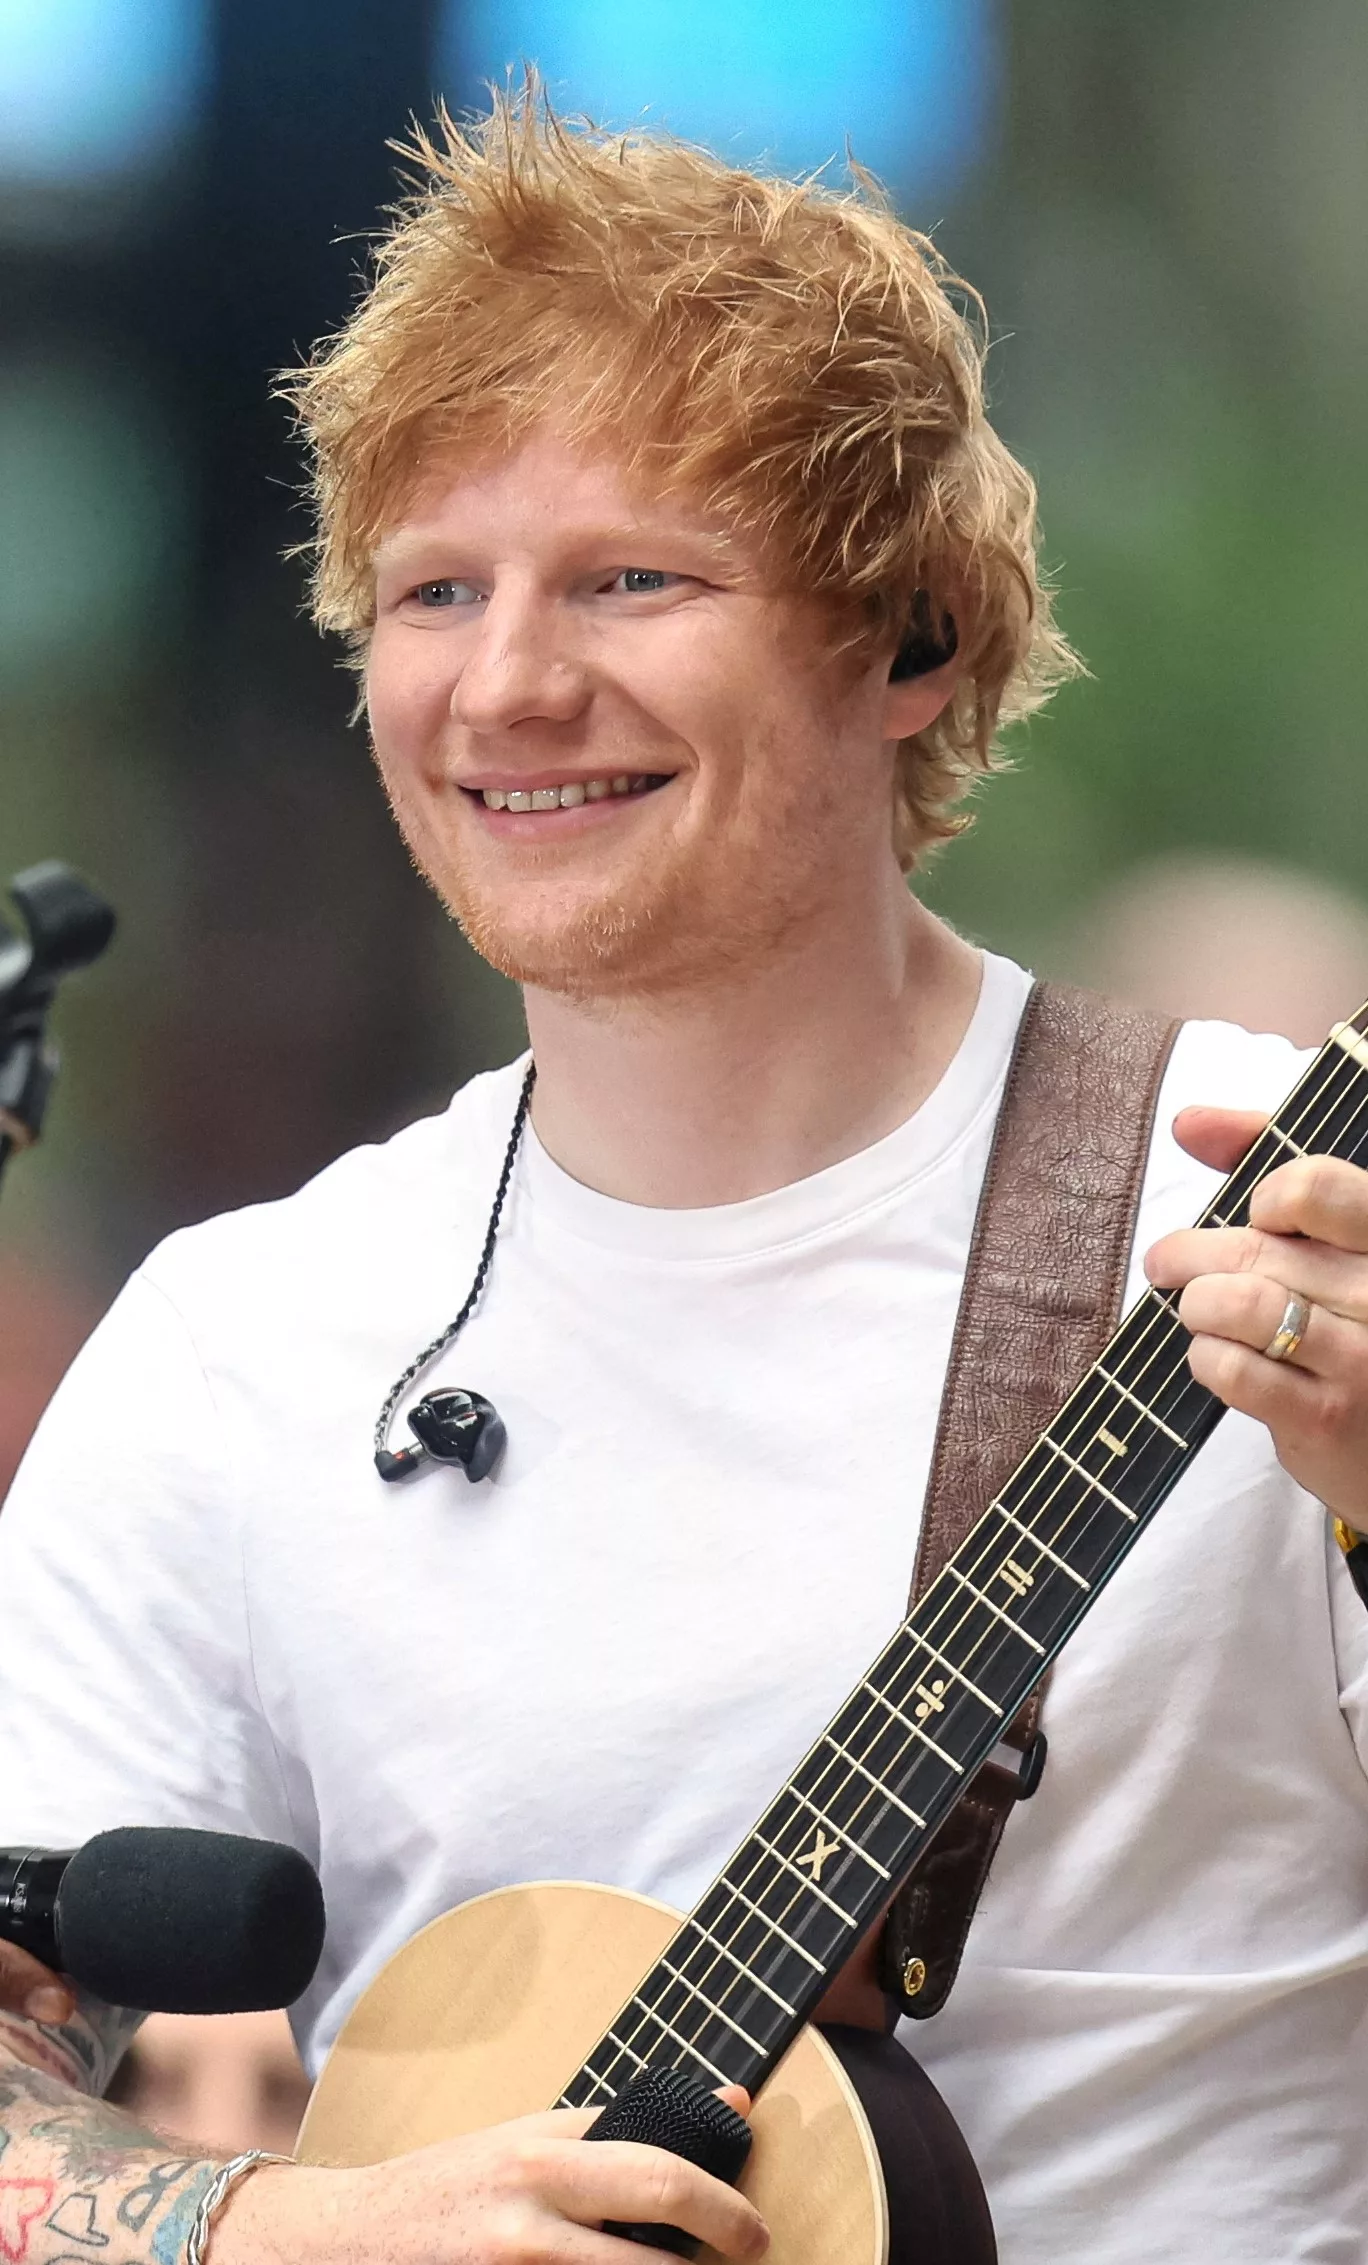 singer-ed-sheeran-performs-on-nbcs-today-show-at-rockefeller-center-in-new-york-2